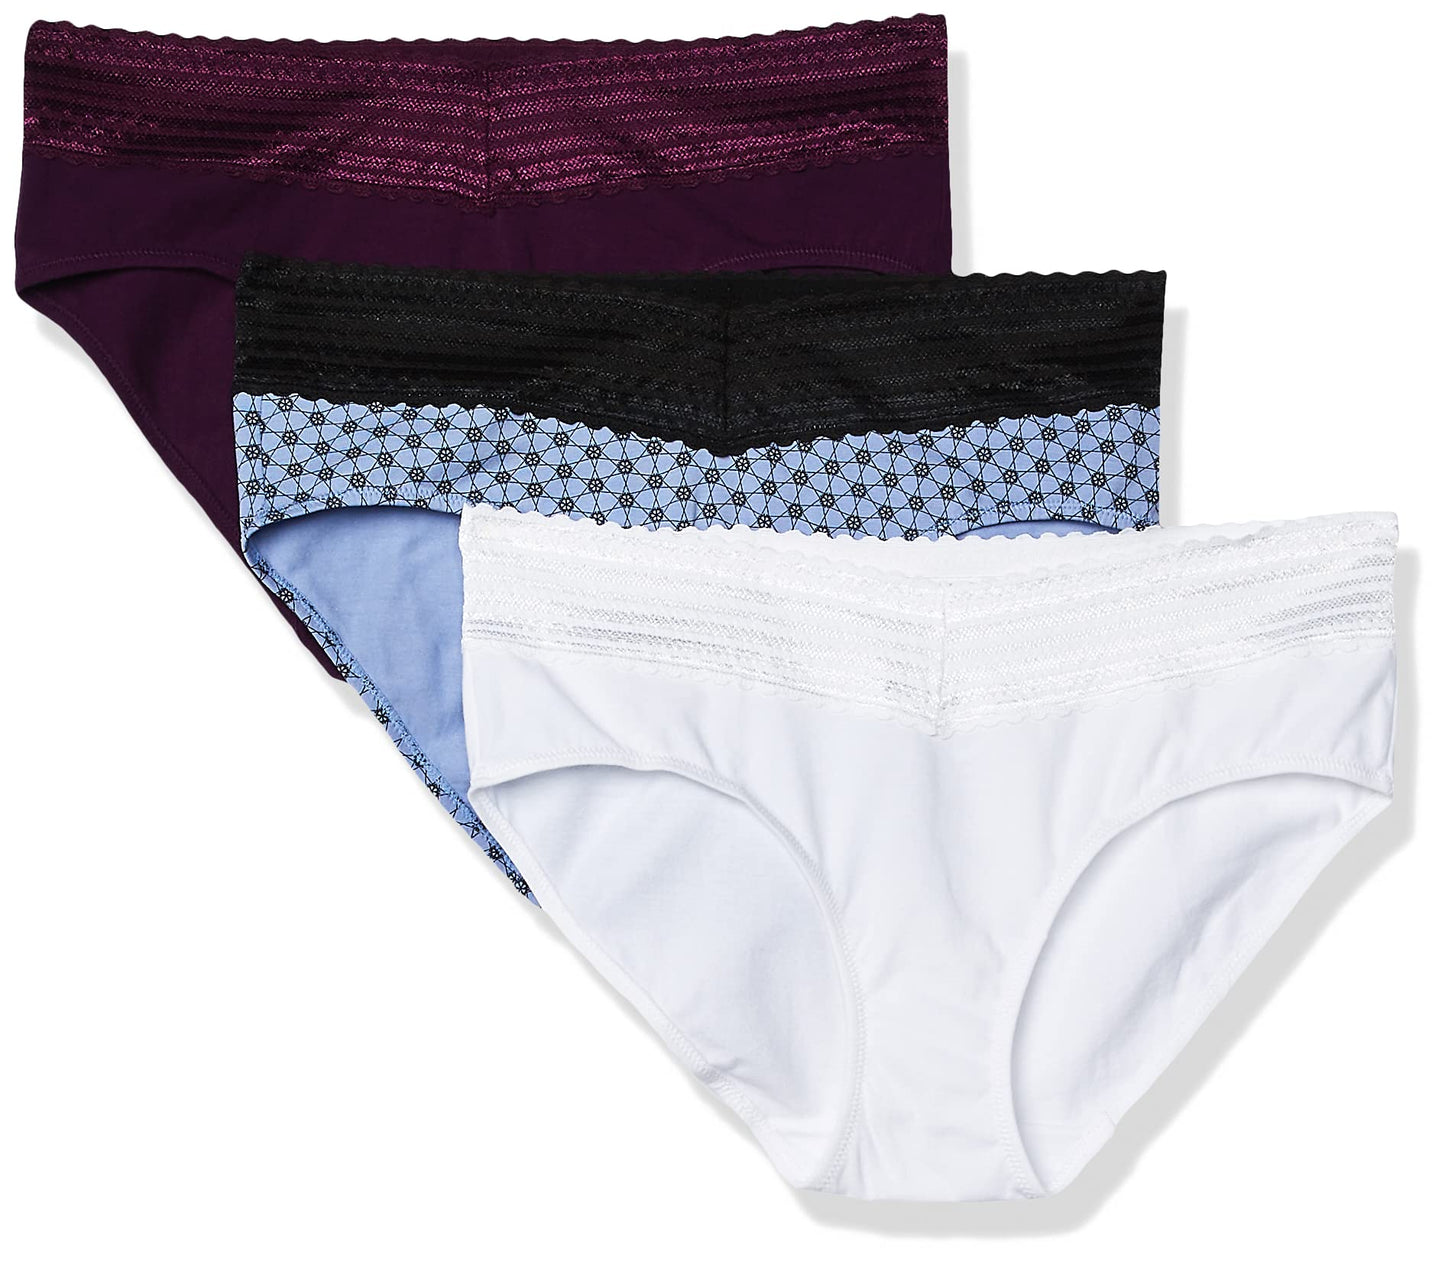 Warner's Women's Blissful Benefits No Muffin 3 Pack Hipster Panties, Plumberry/White/Holiday Print